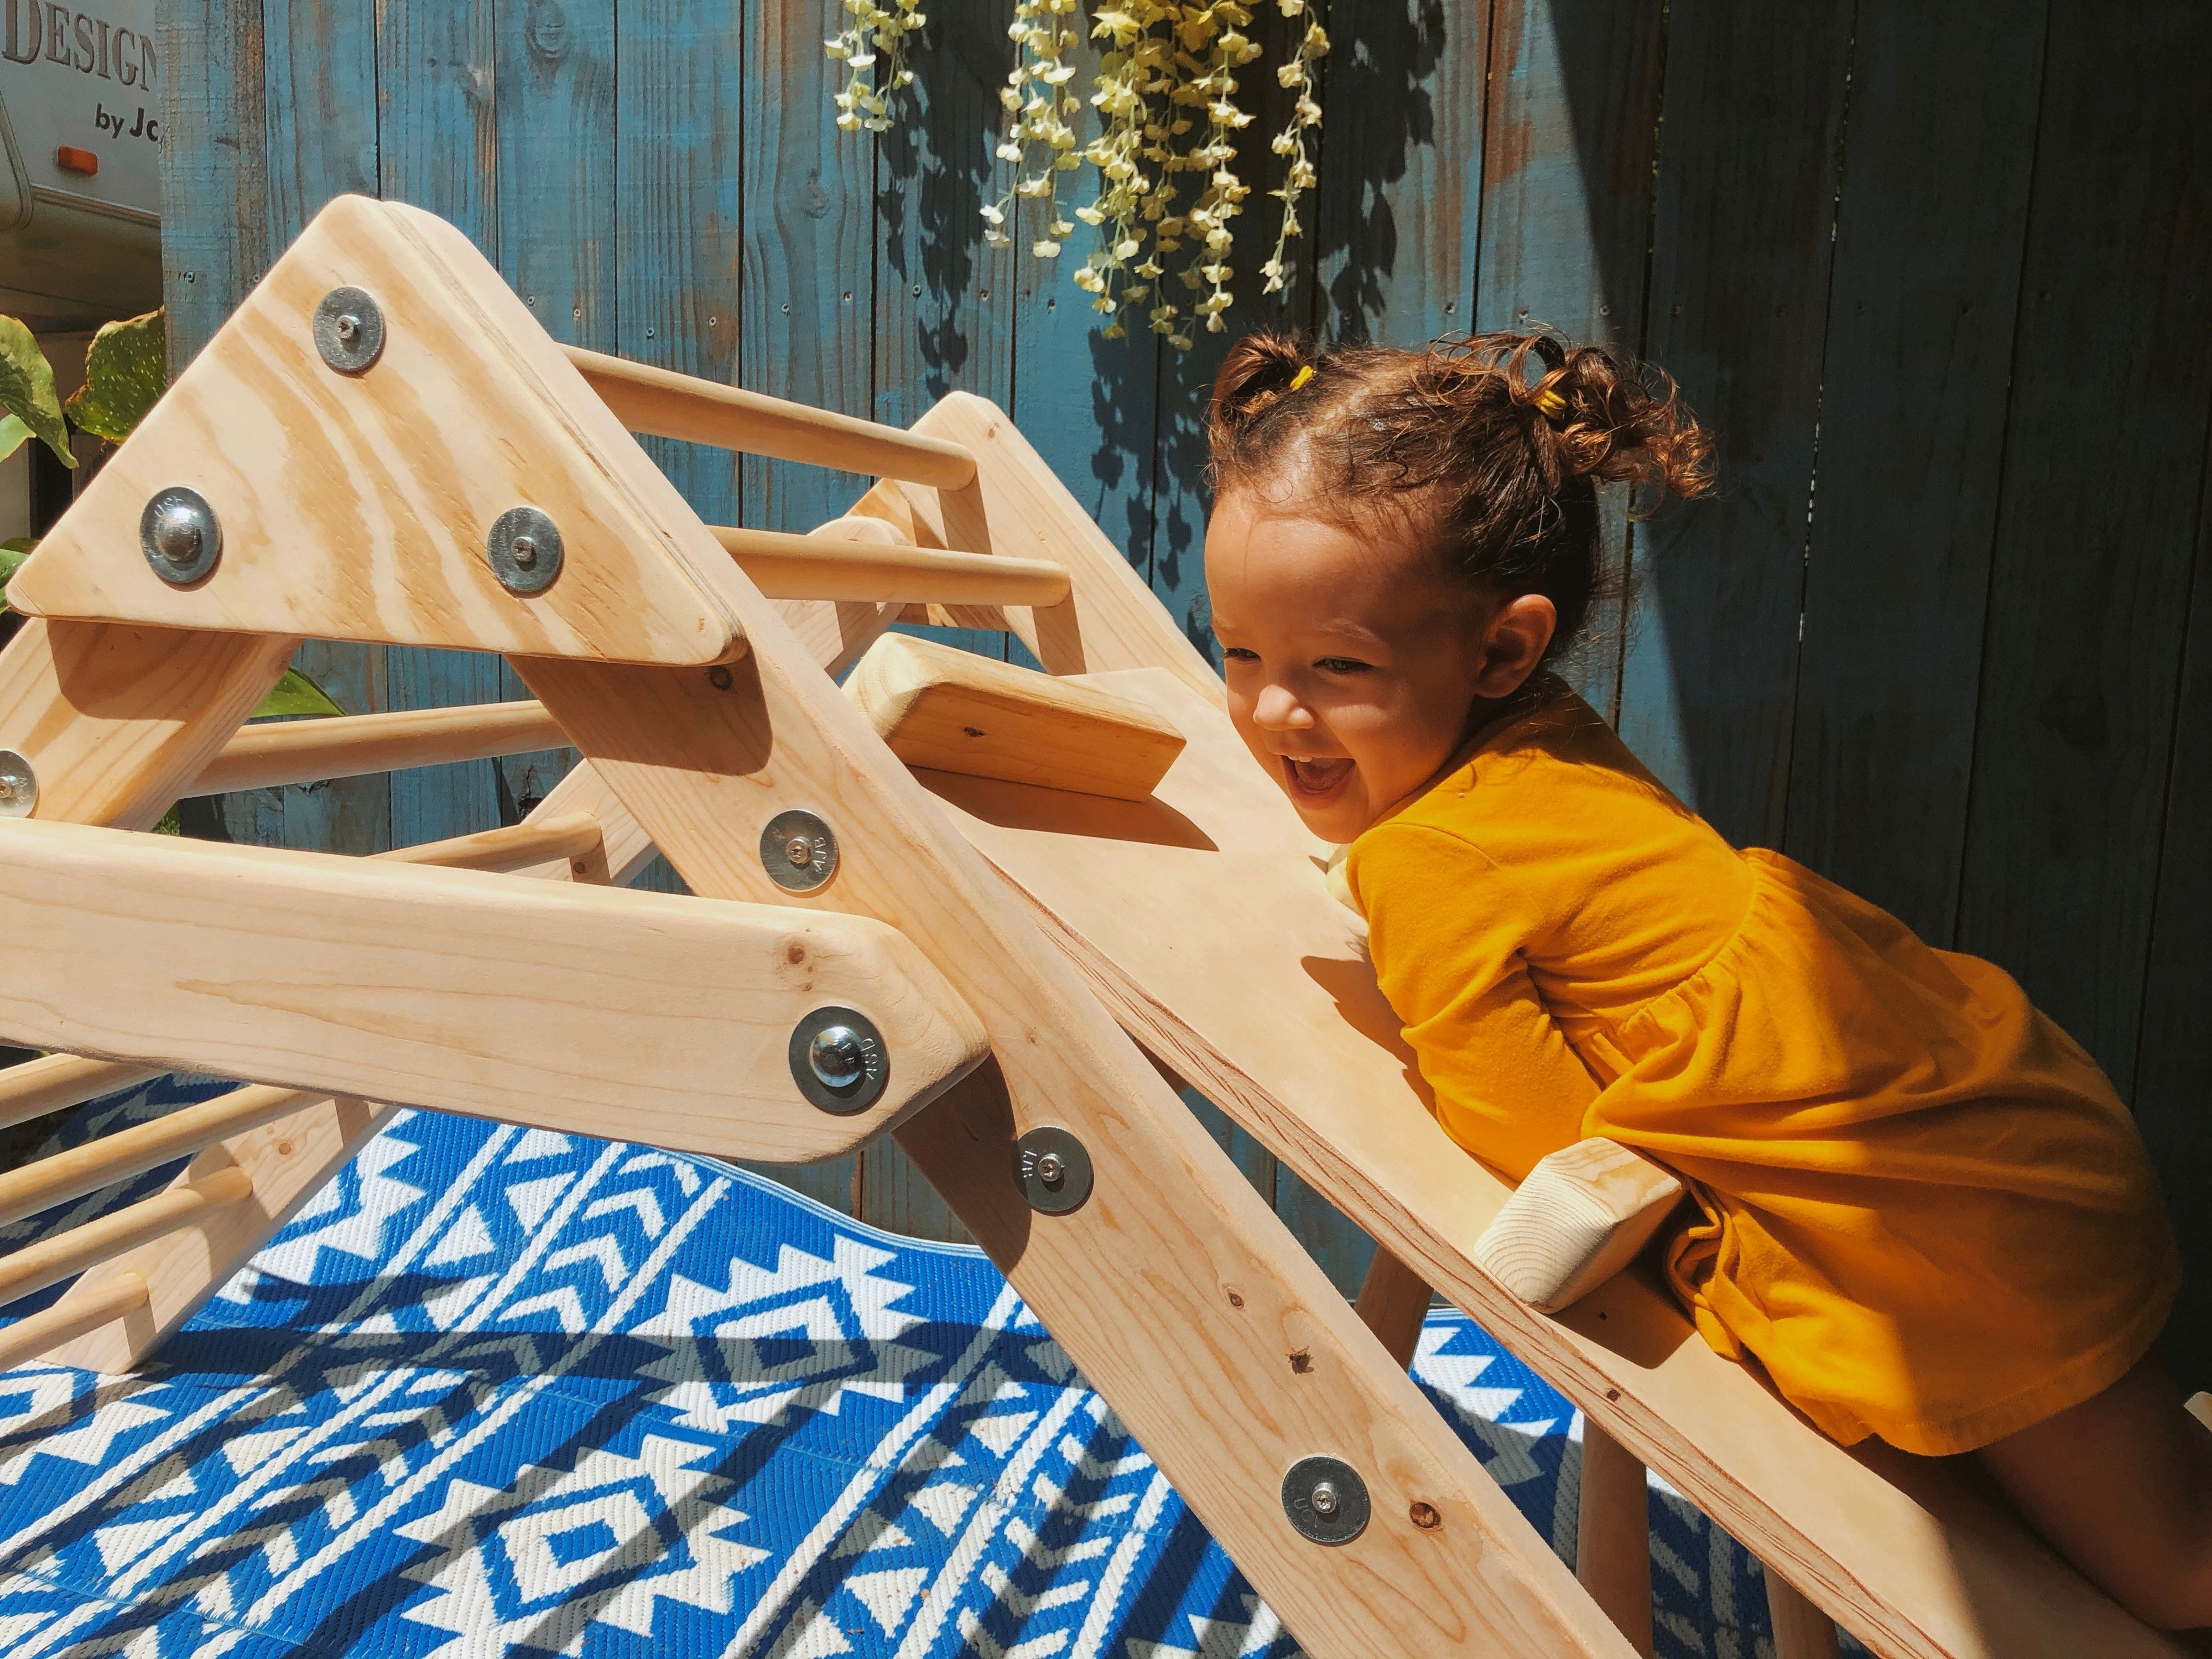 Toddler plays happily on wooden triangle climber outdoors